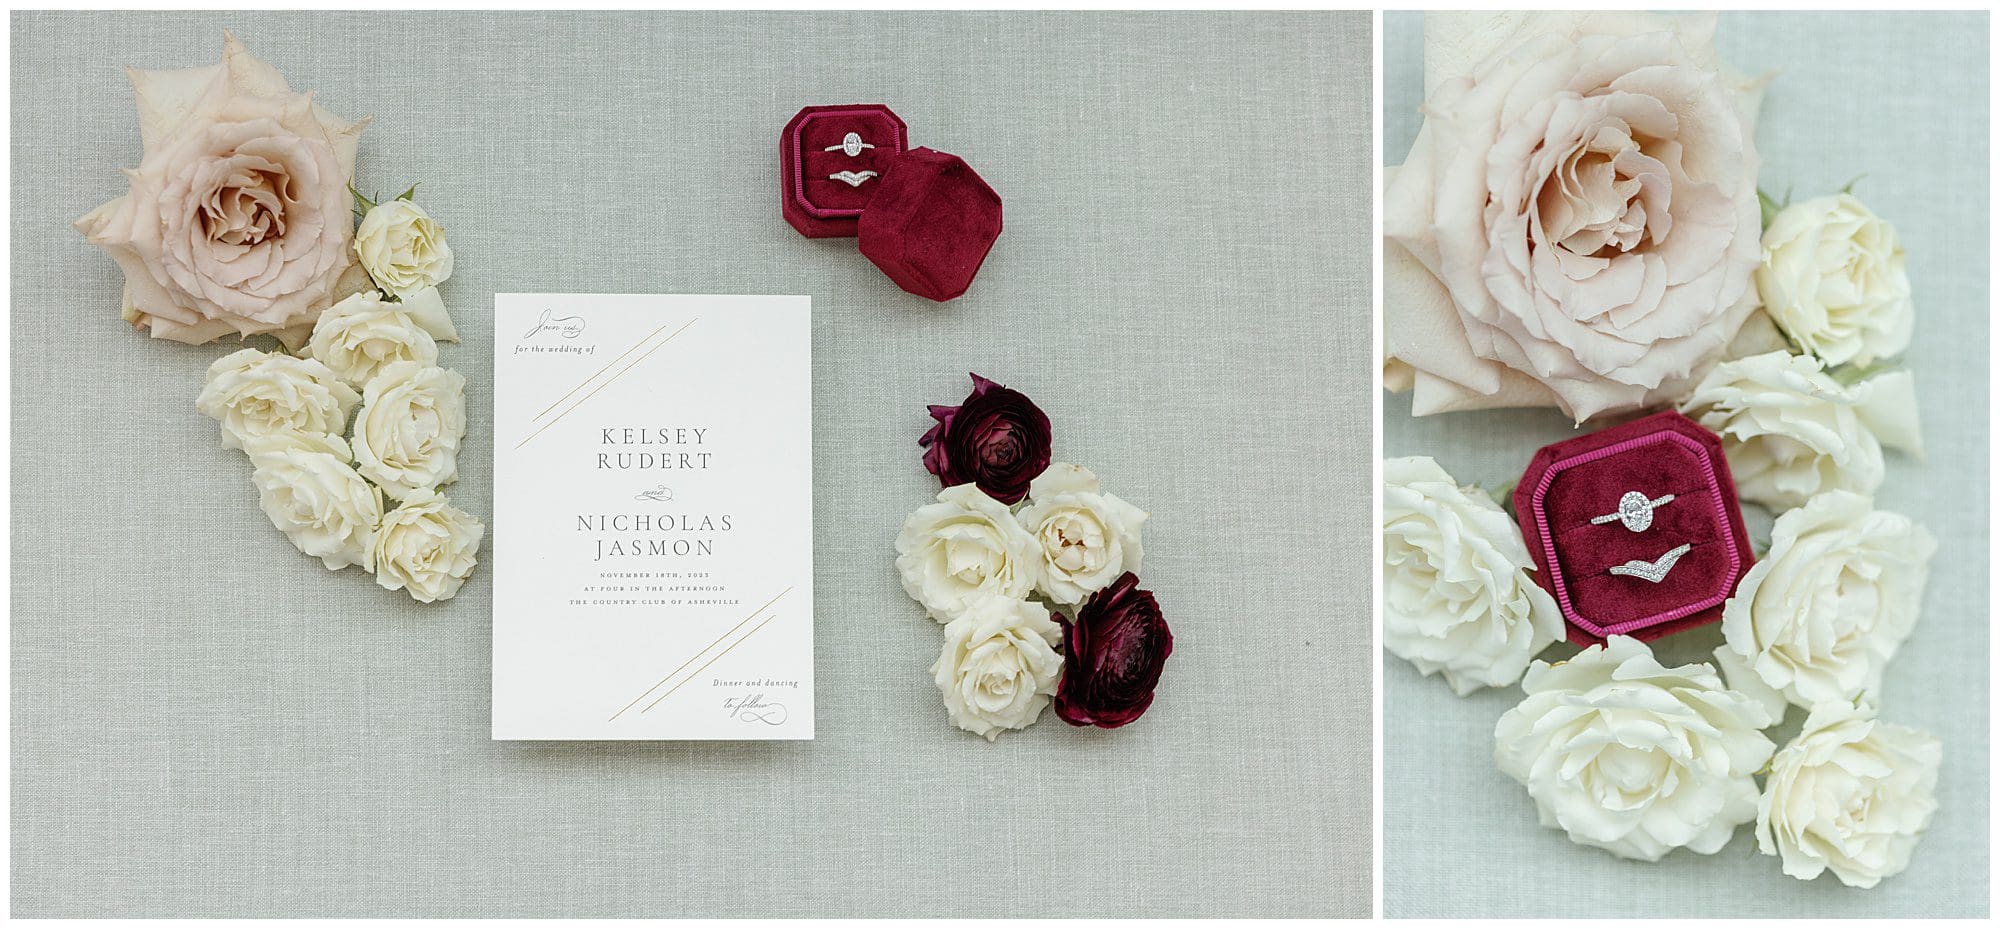 Burgundy velvet ring box and wedding invitations and roses on a styled for wedding detail photos 